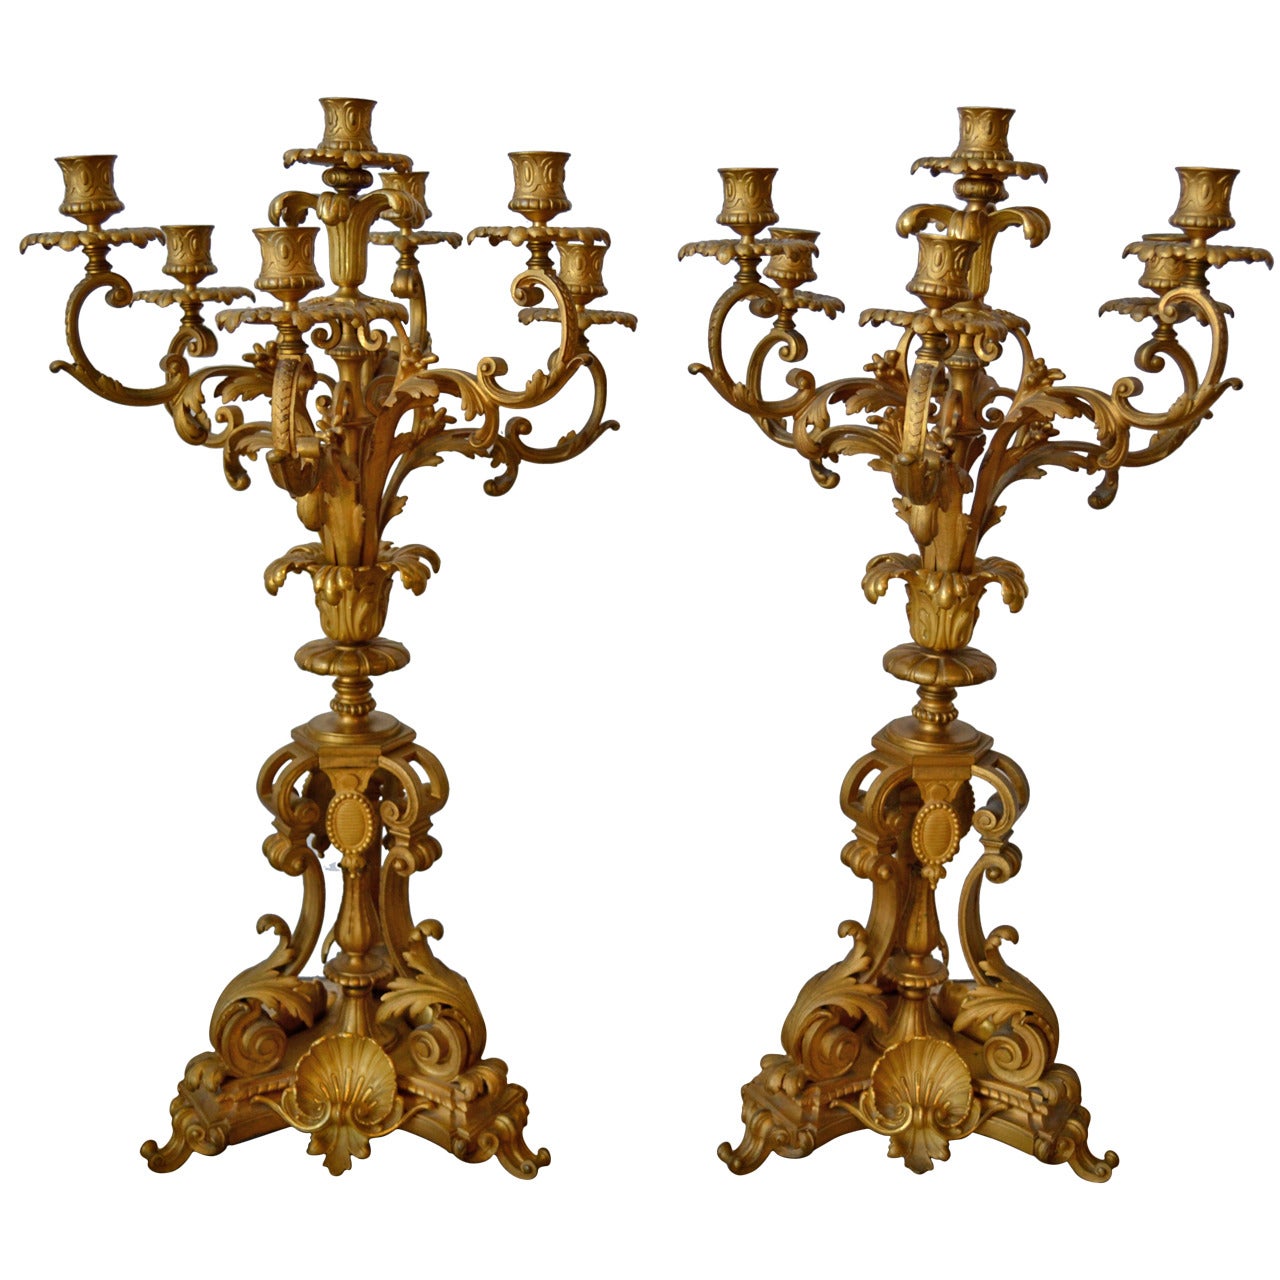 Pair of French Late 19th Century Gilt Bronze Candelabras, Fourteen Lights